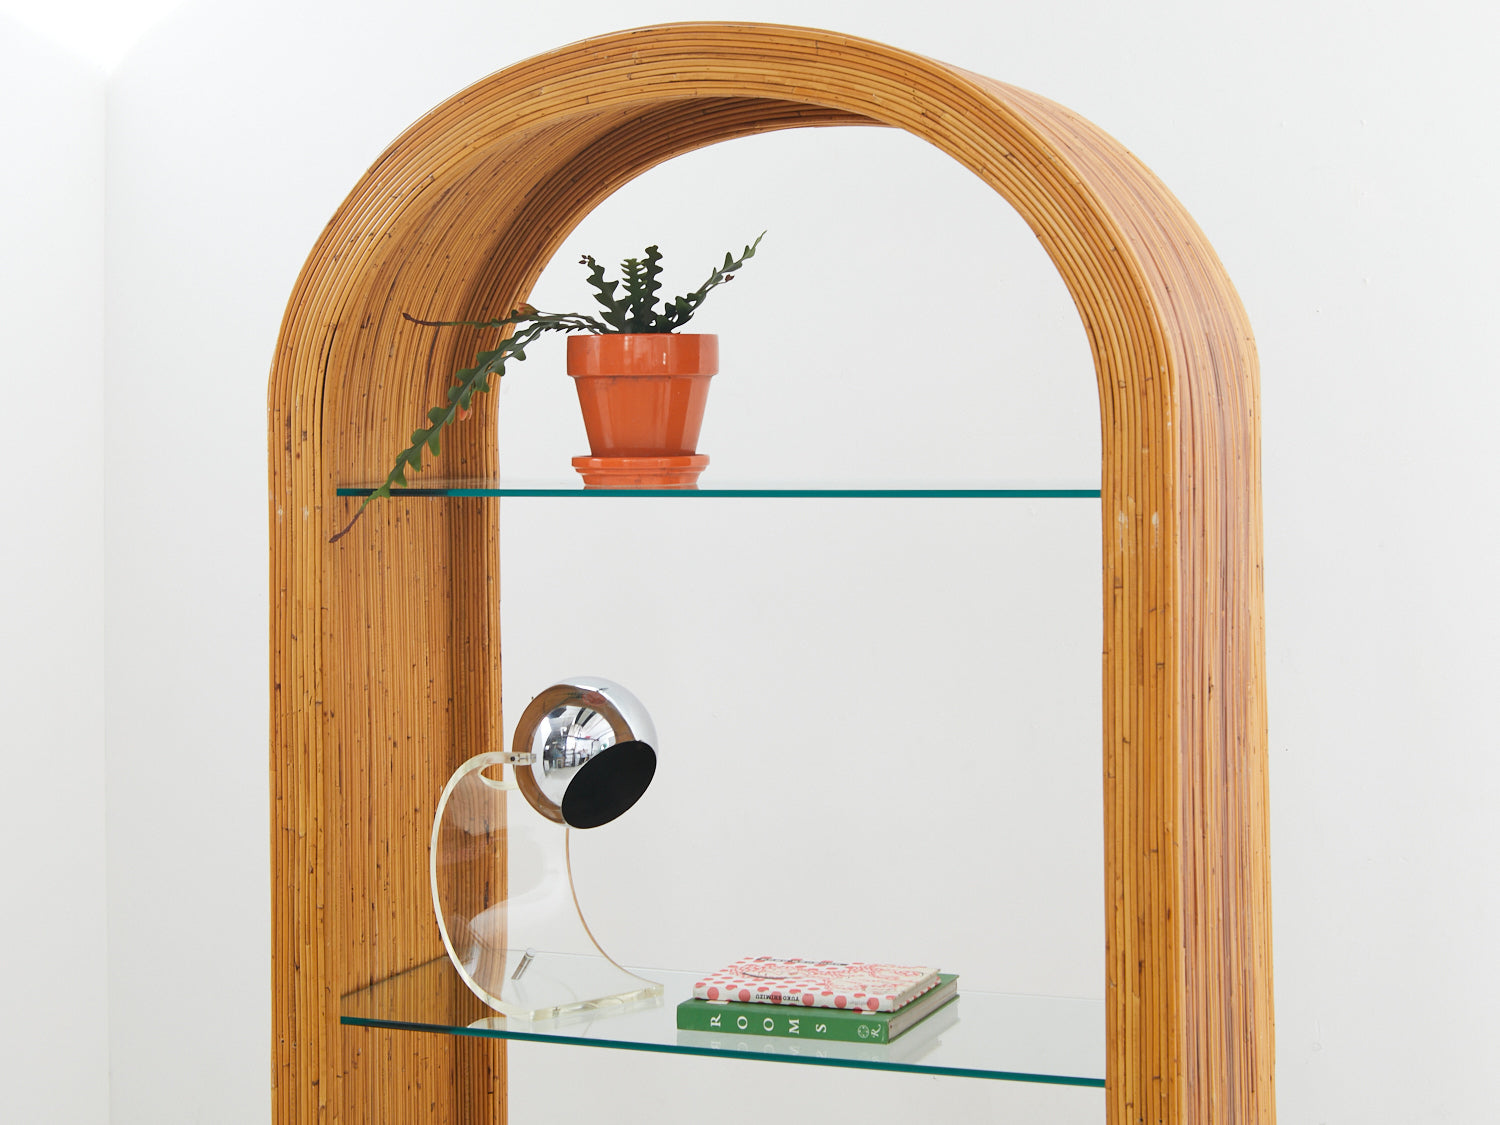 Pencil reed etagere with a plant, lamp, and books on the glass shelves